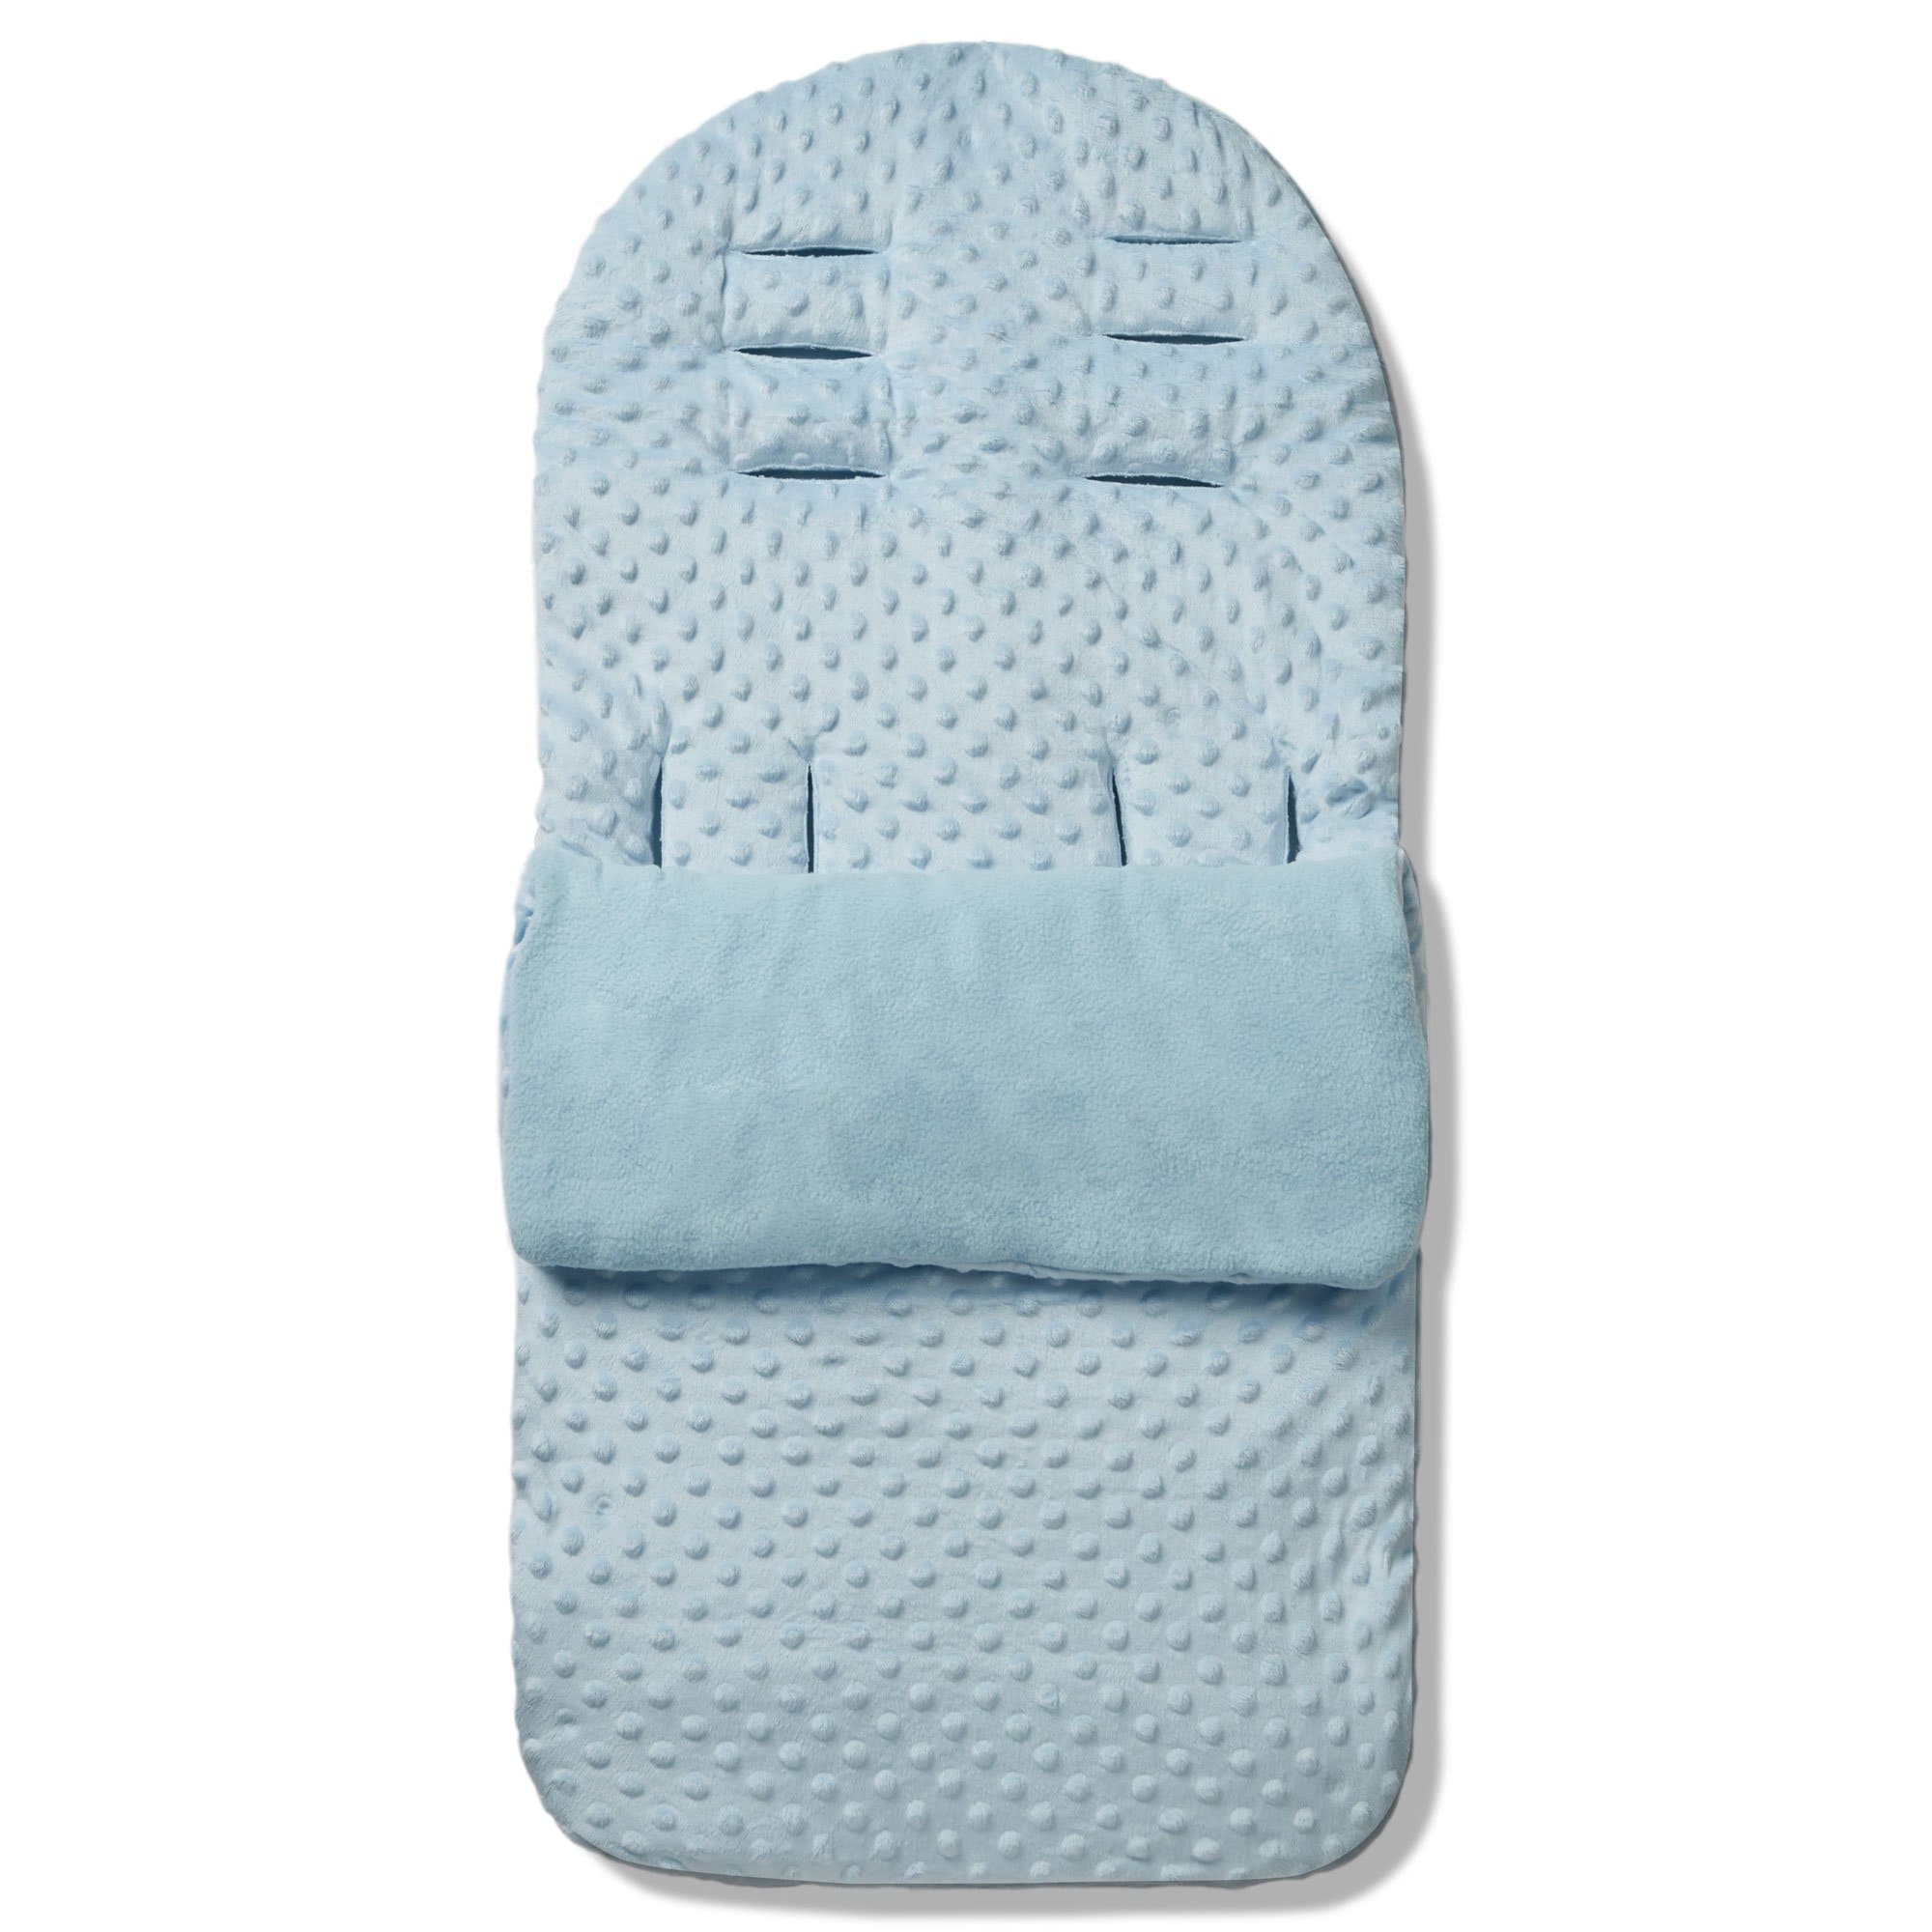 Dimple Footmuff / Cosy Toes Compatible with Brevi - Blue / Fits All Models | For Your Little One